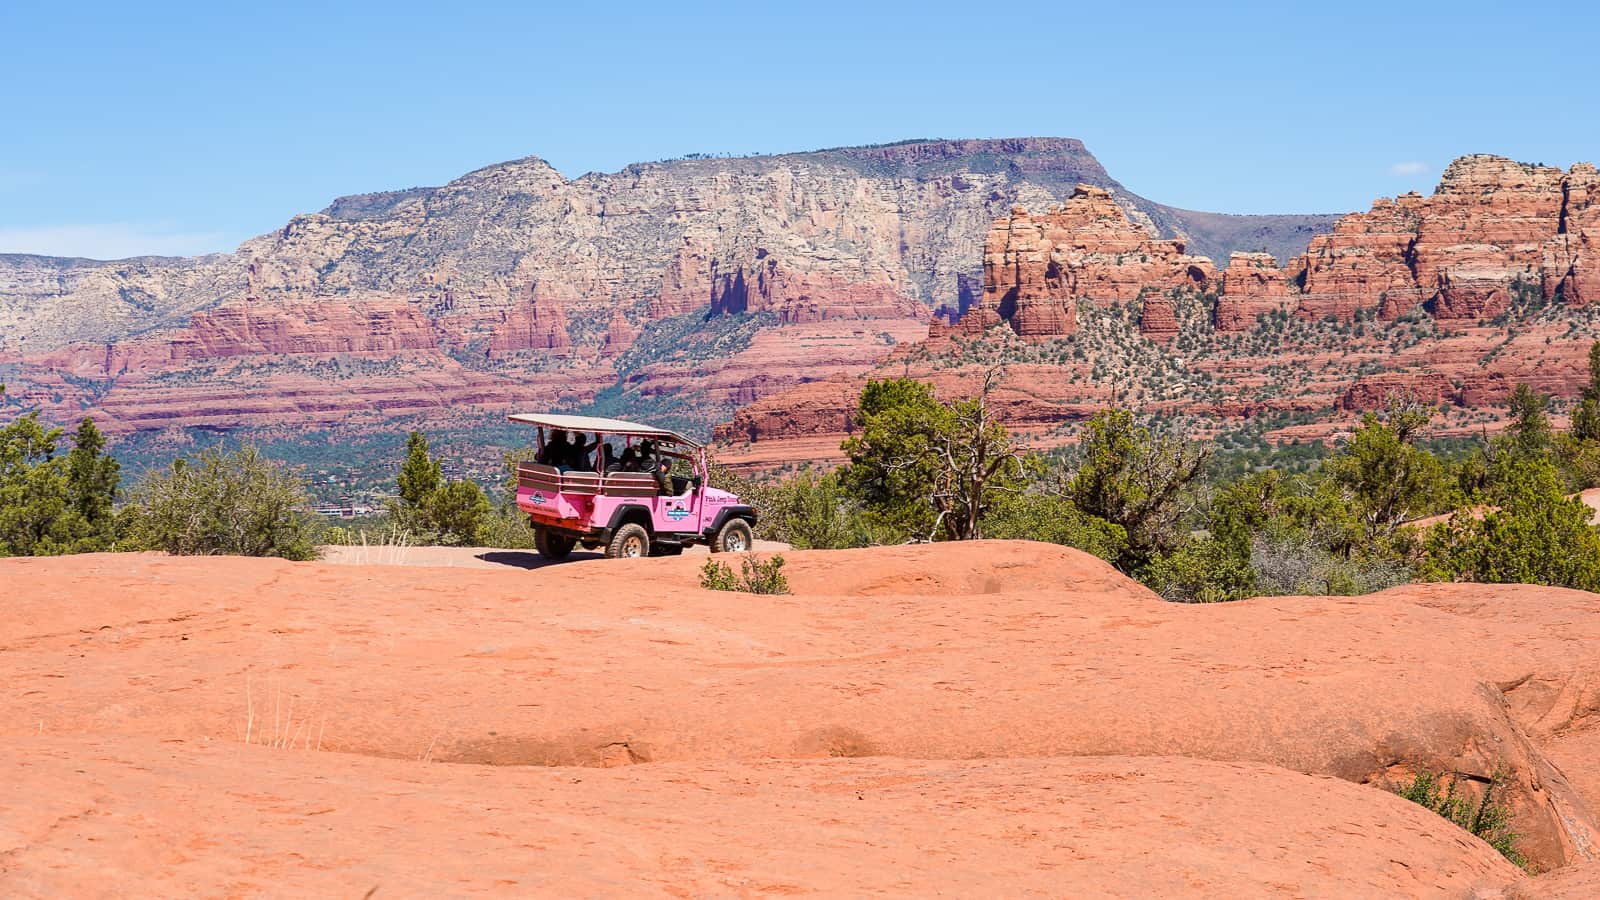 pink jeep tours